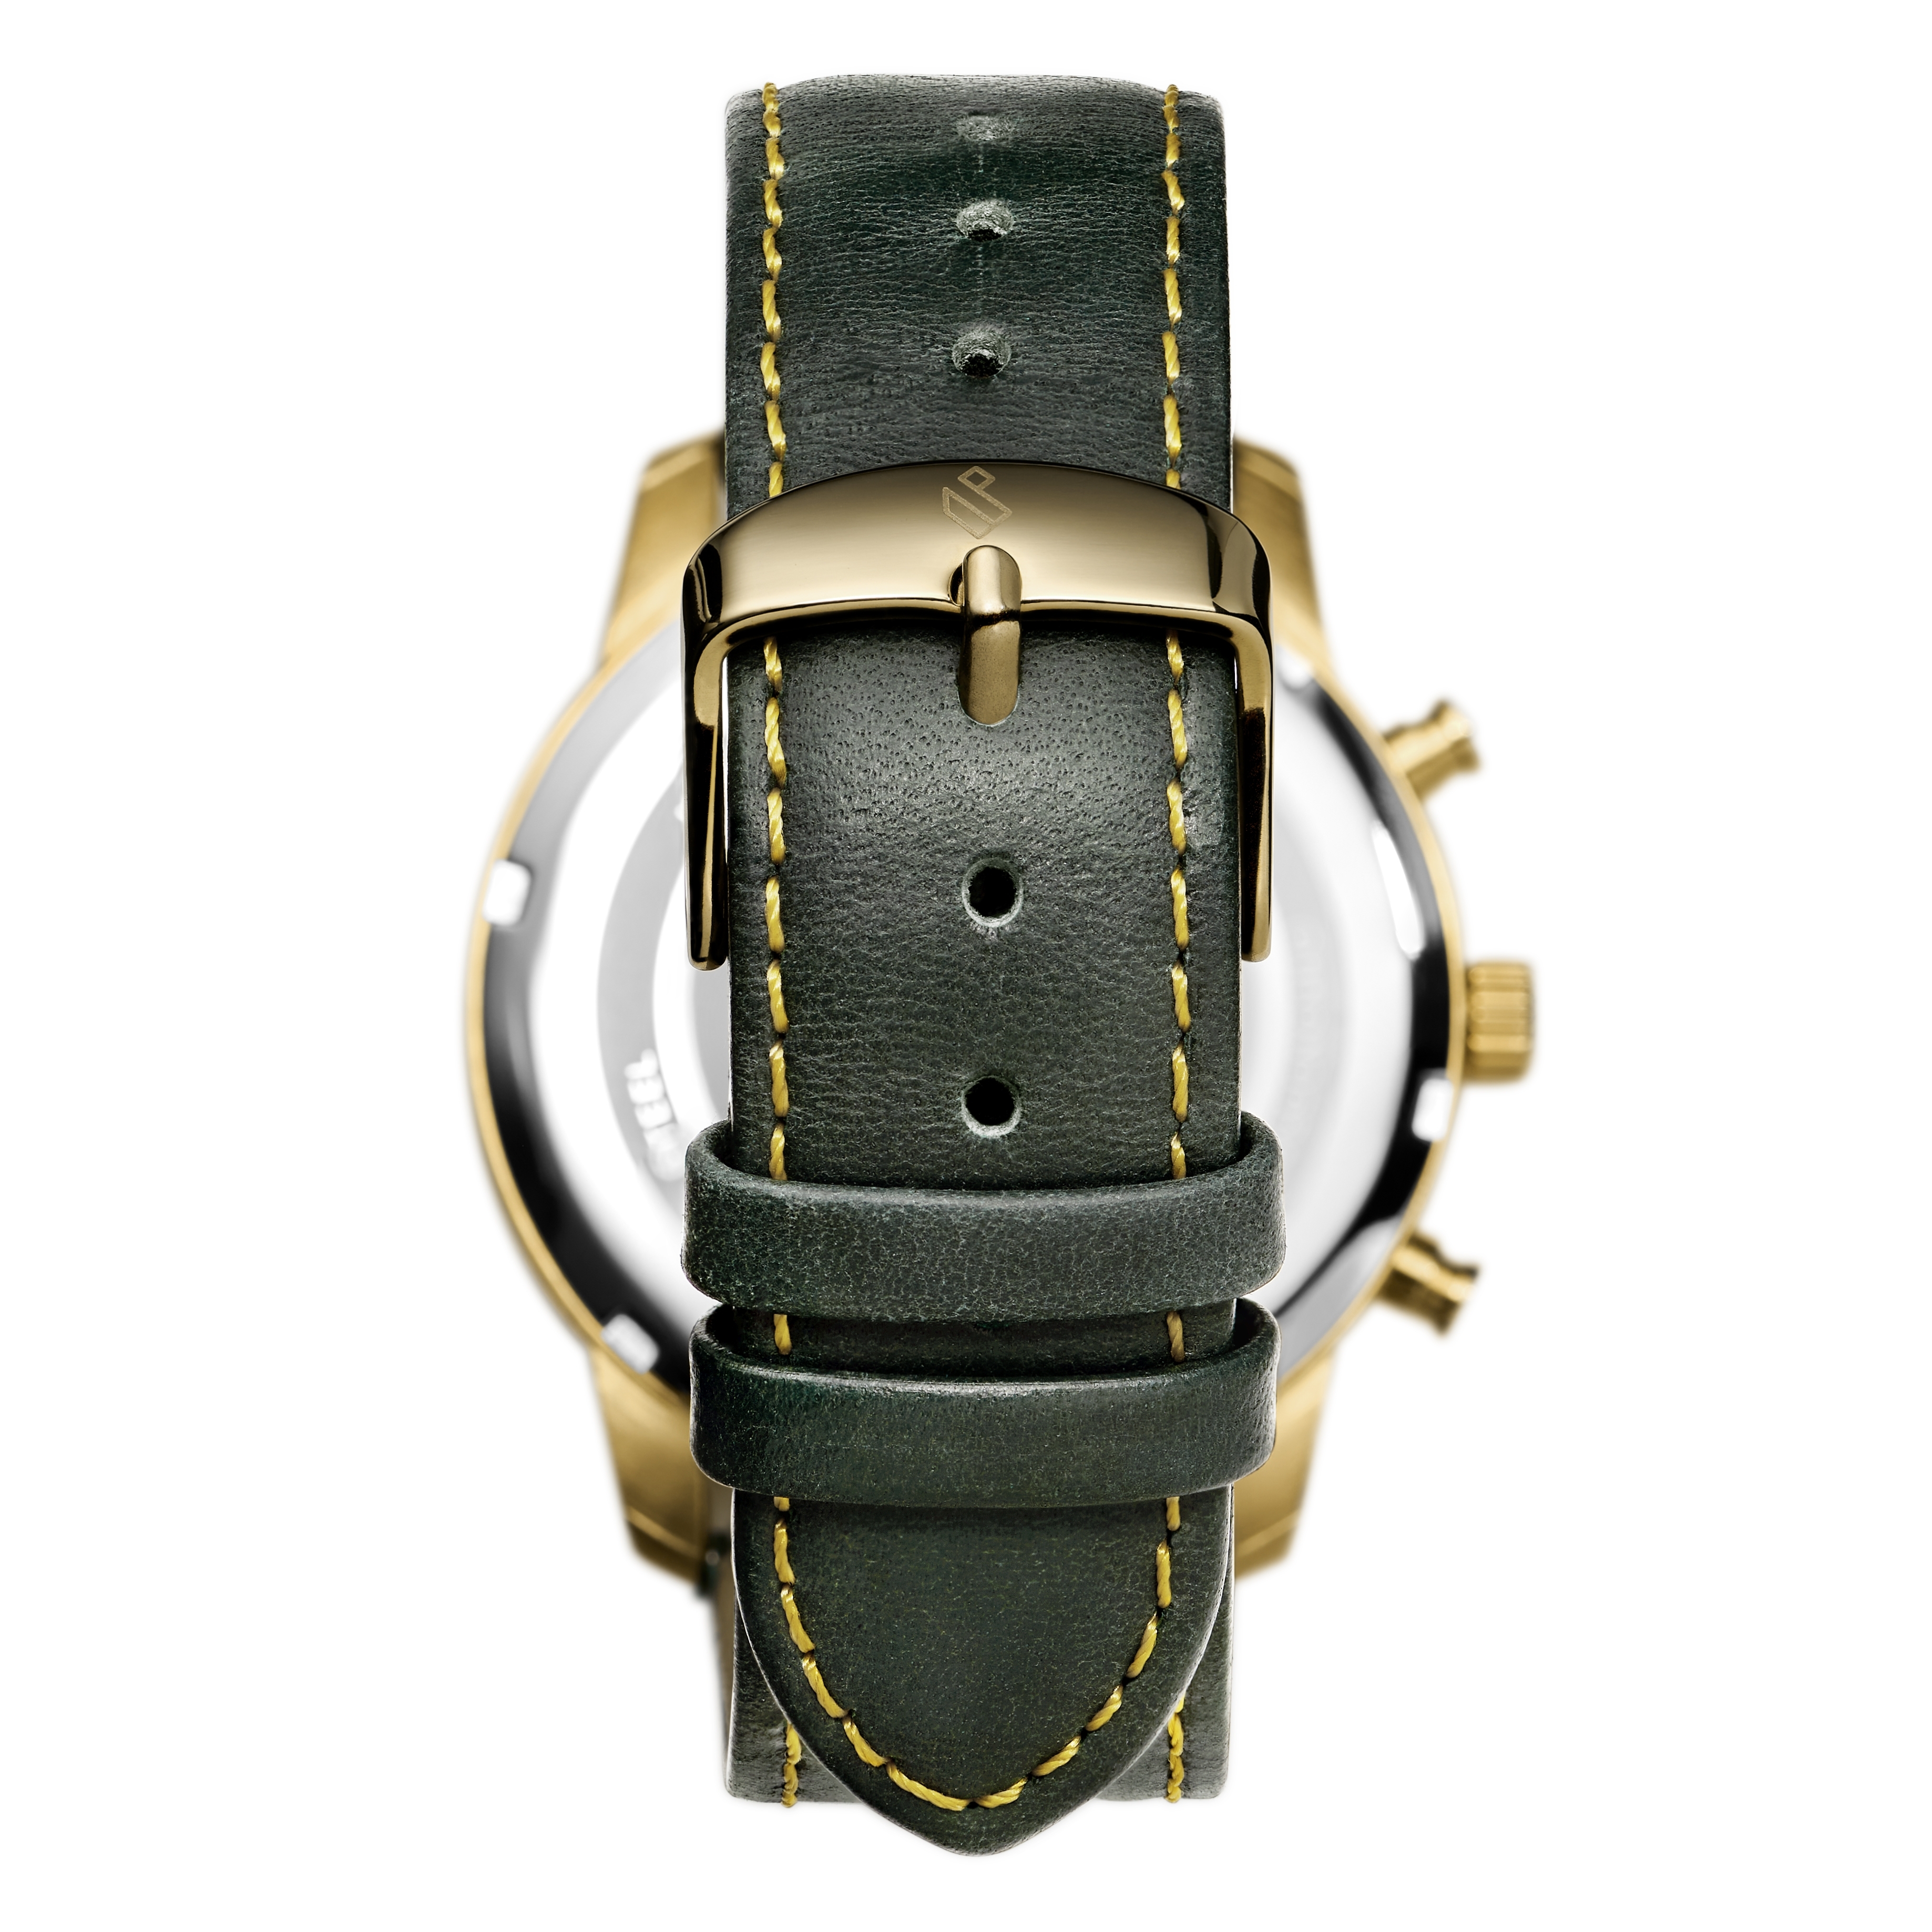 Parva | With Strap Seizmont Chronograph Black In Green | Leather | & stock! Dial Gold-Tone Watch